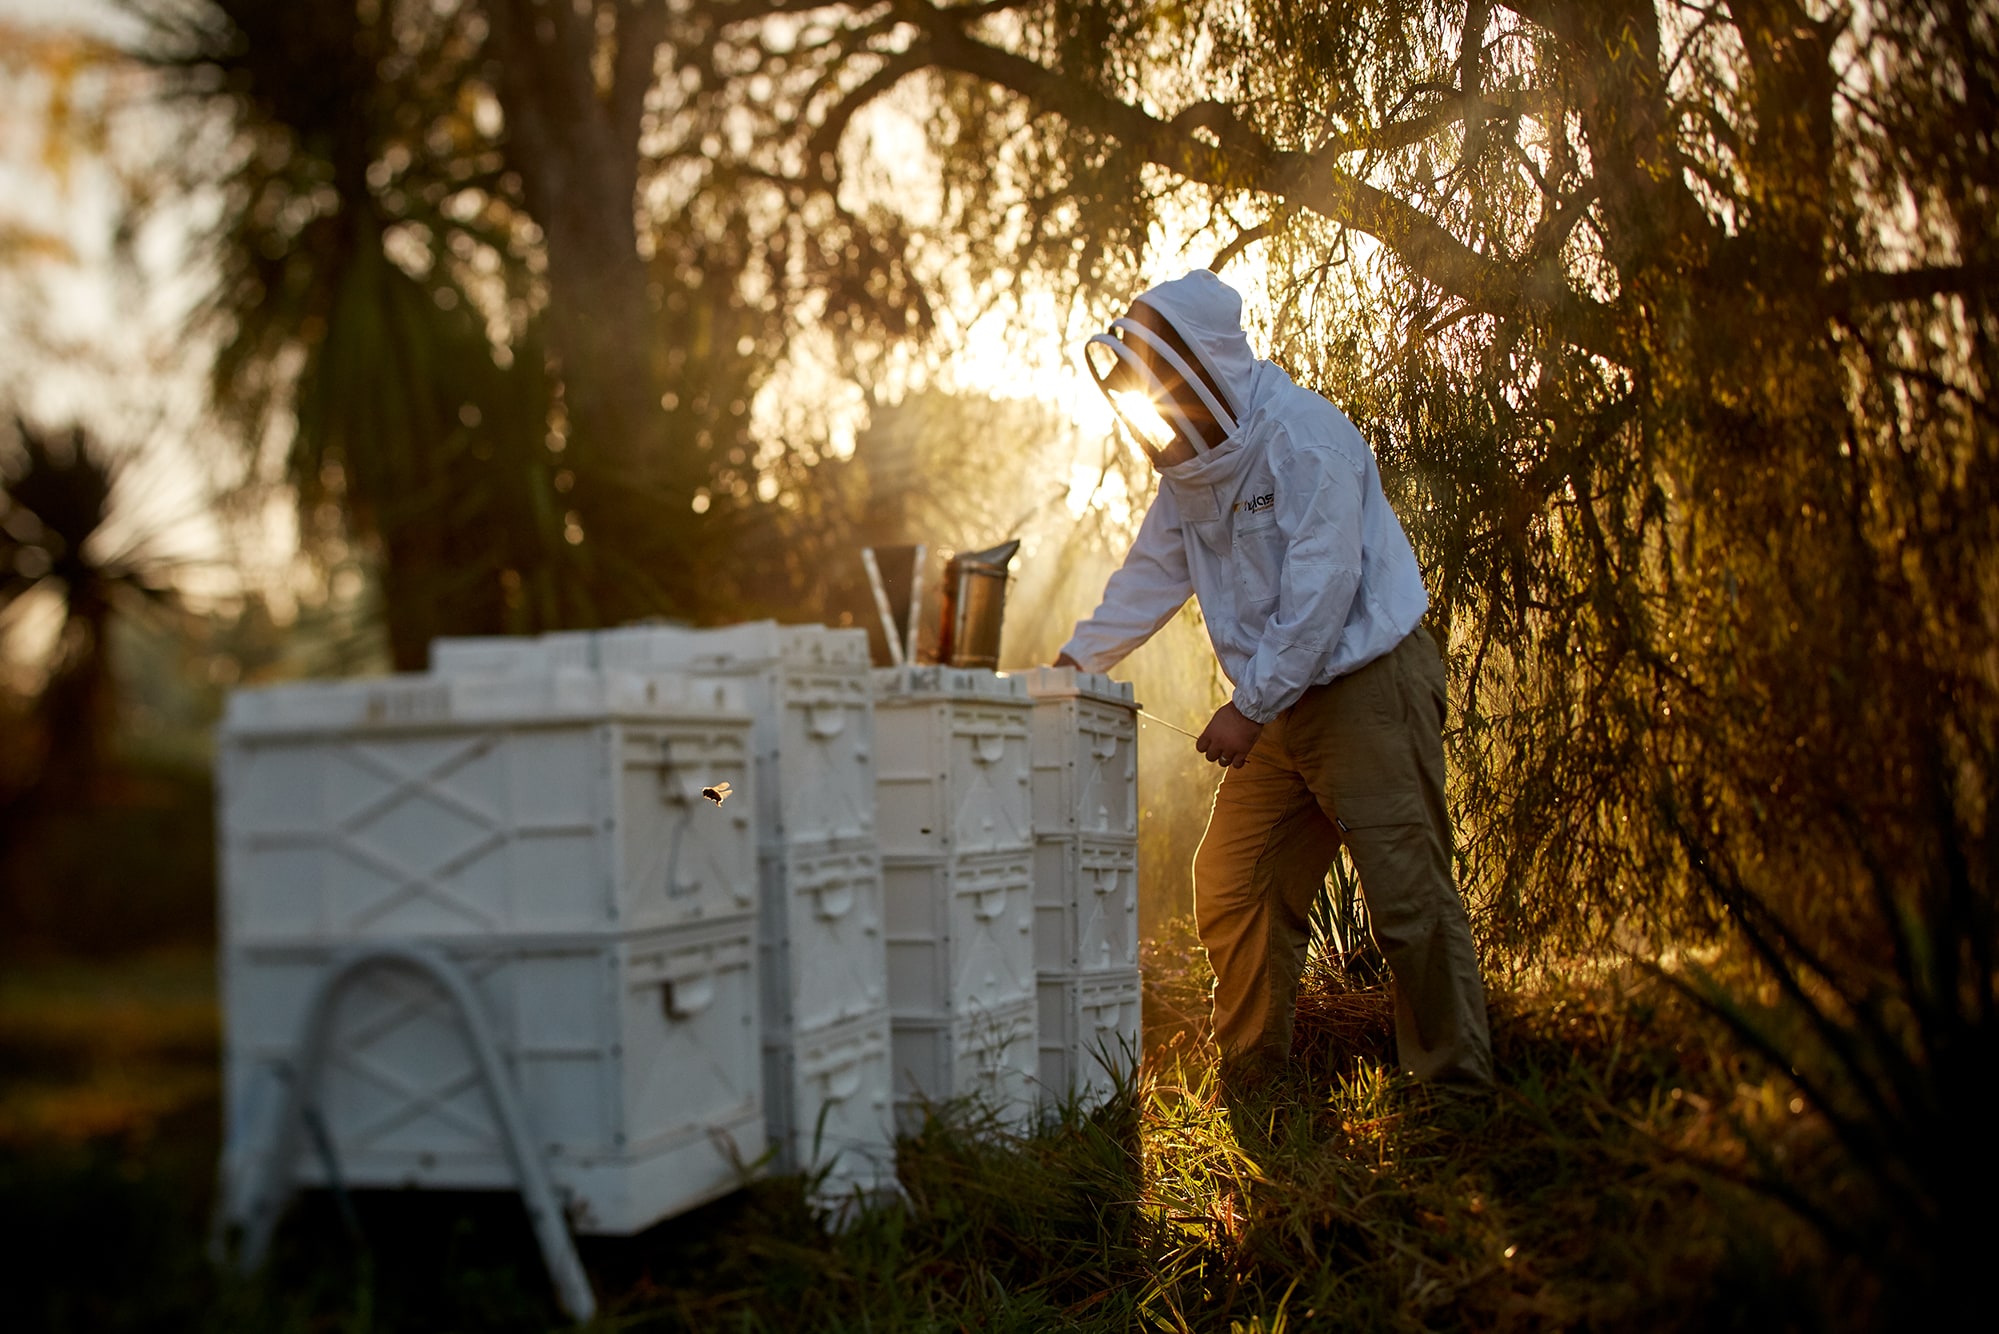 An apiarist using plastic bee hives by Nuplas Apiarist Supplies